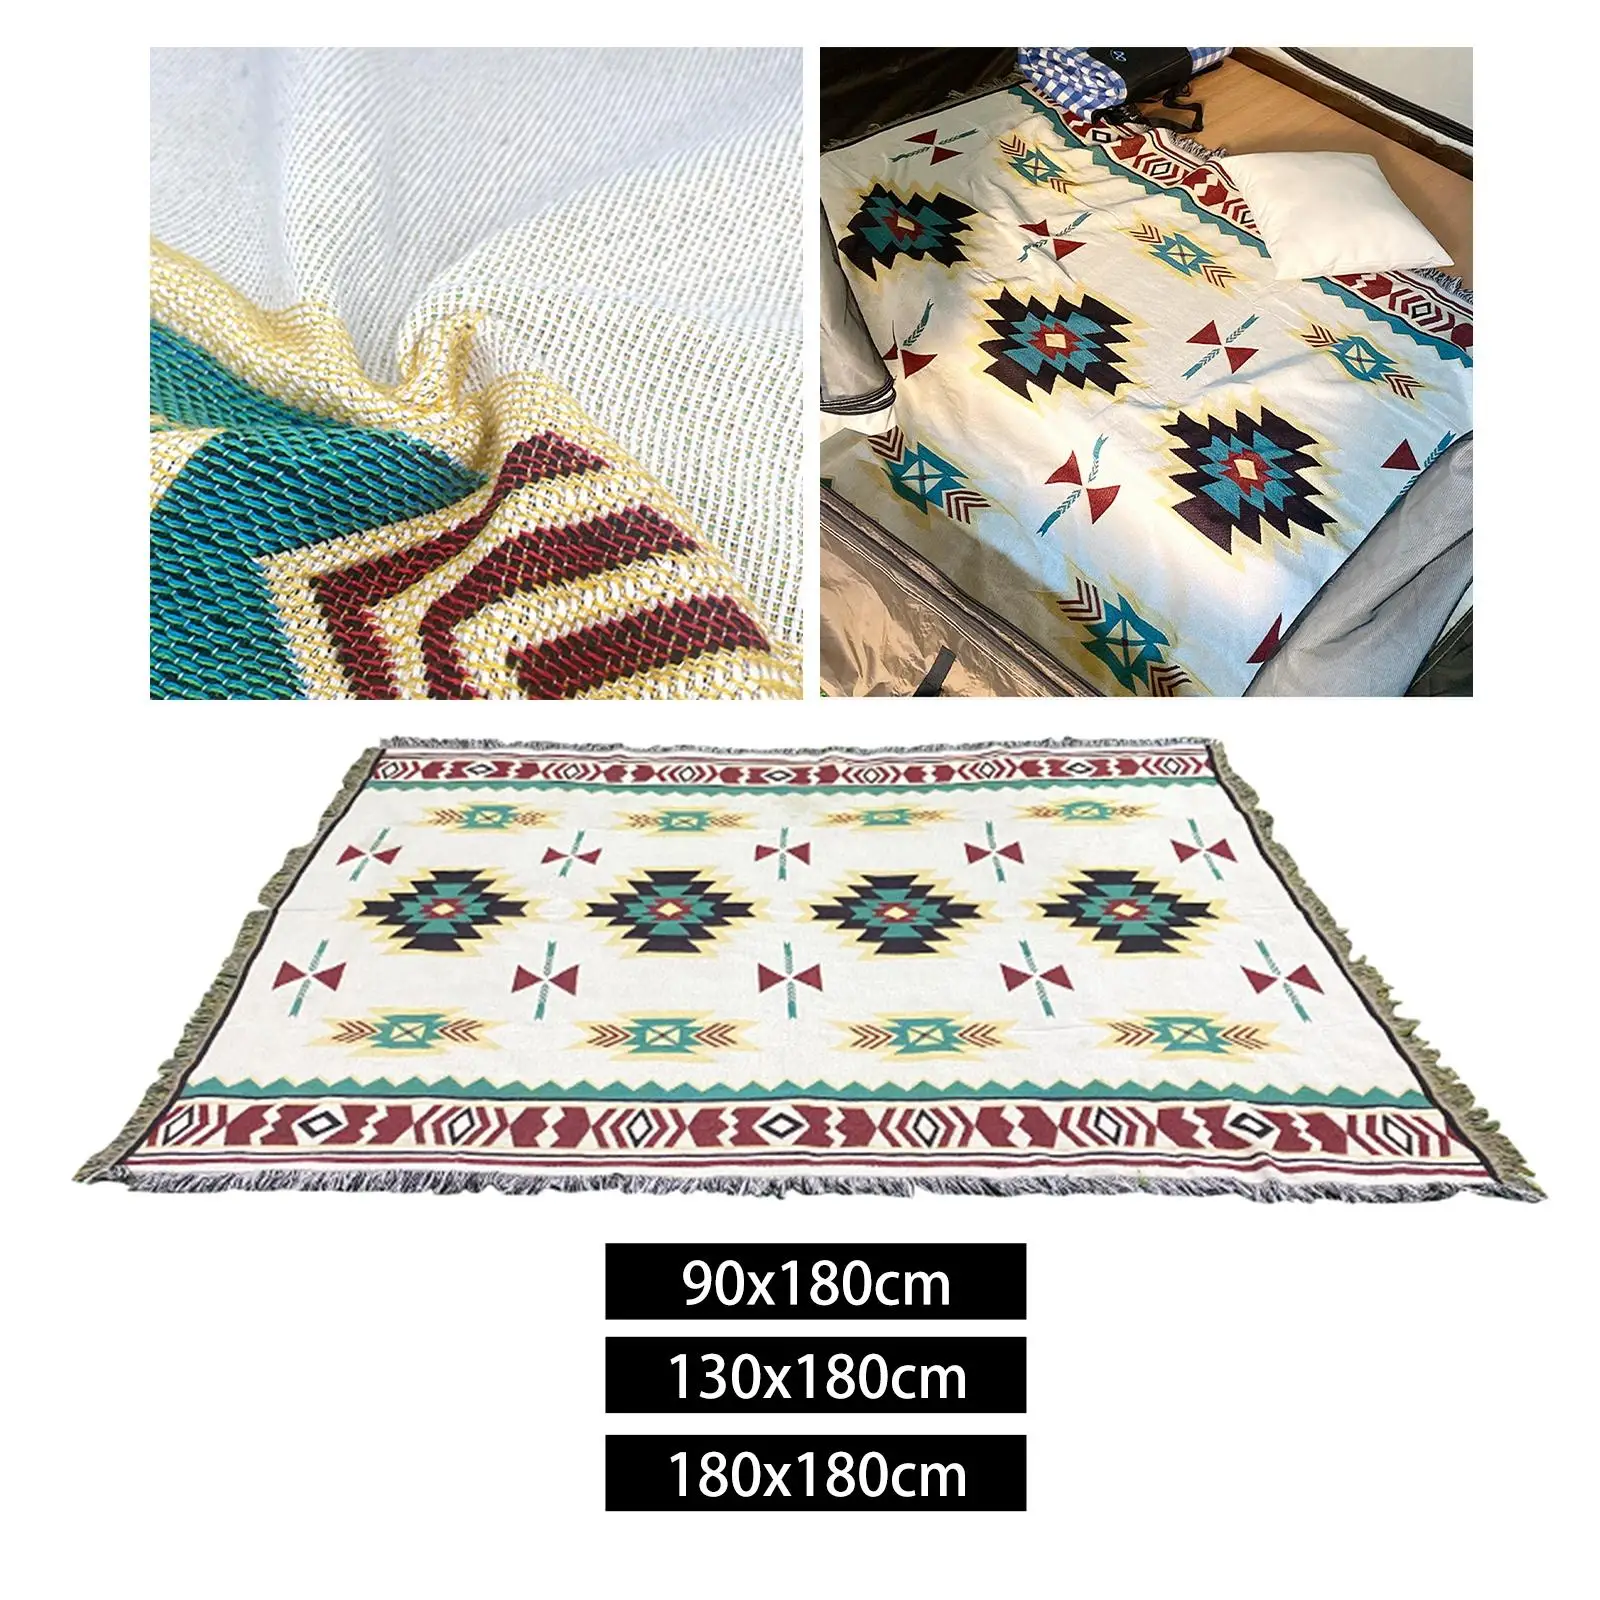 Picnic Mat Bed Skirt Reusable Casual Carpet for Indoor, Outdoor Picnic,